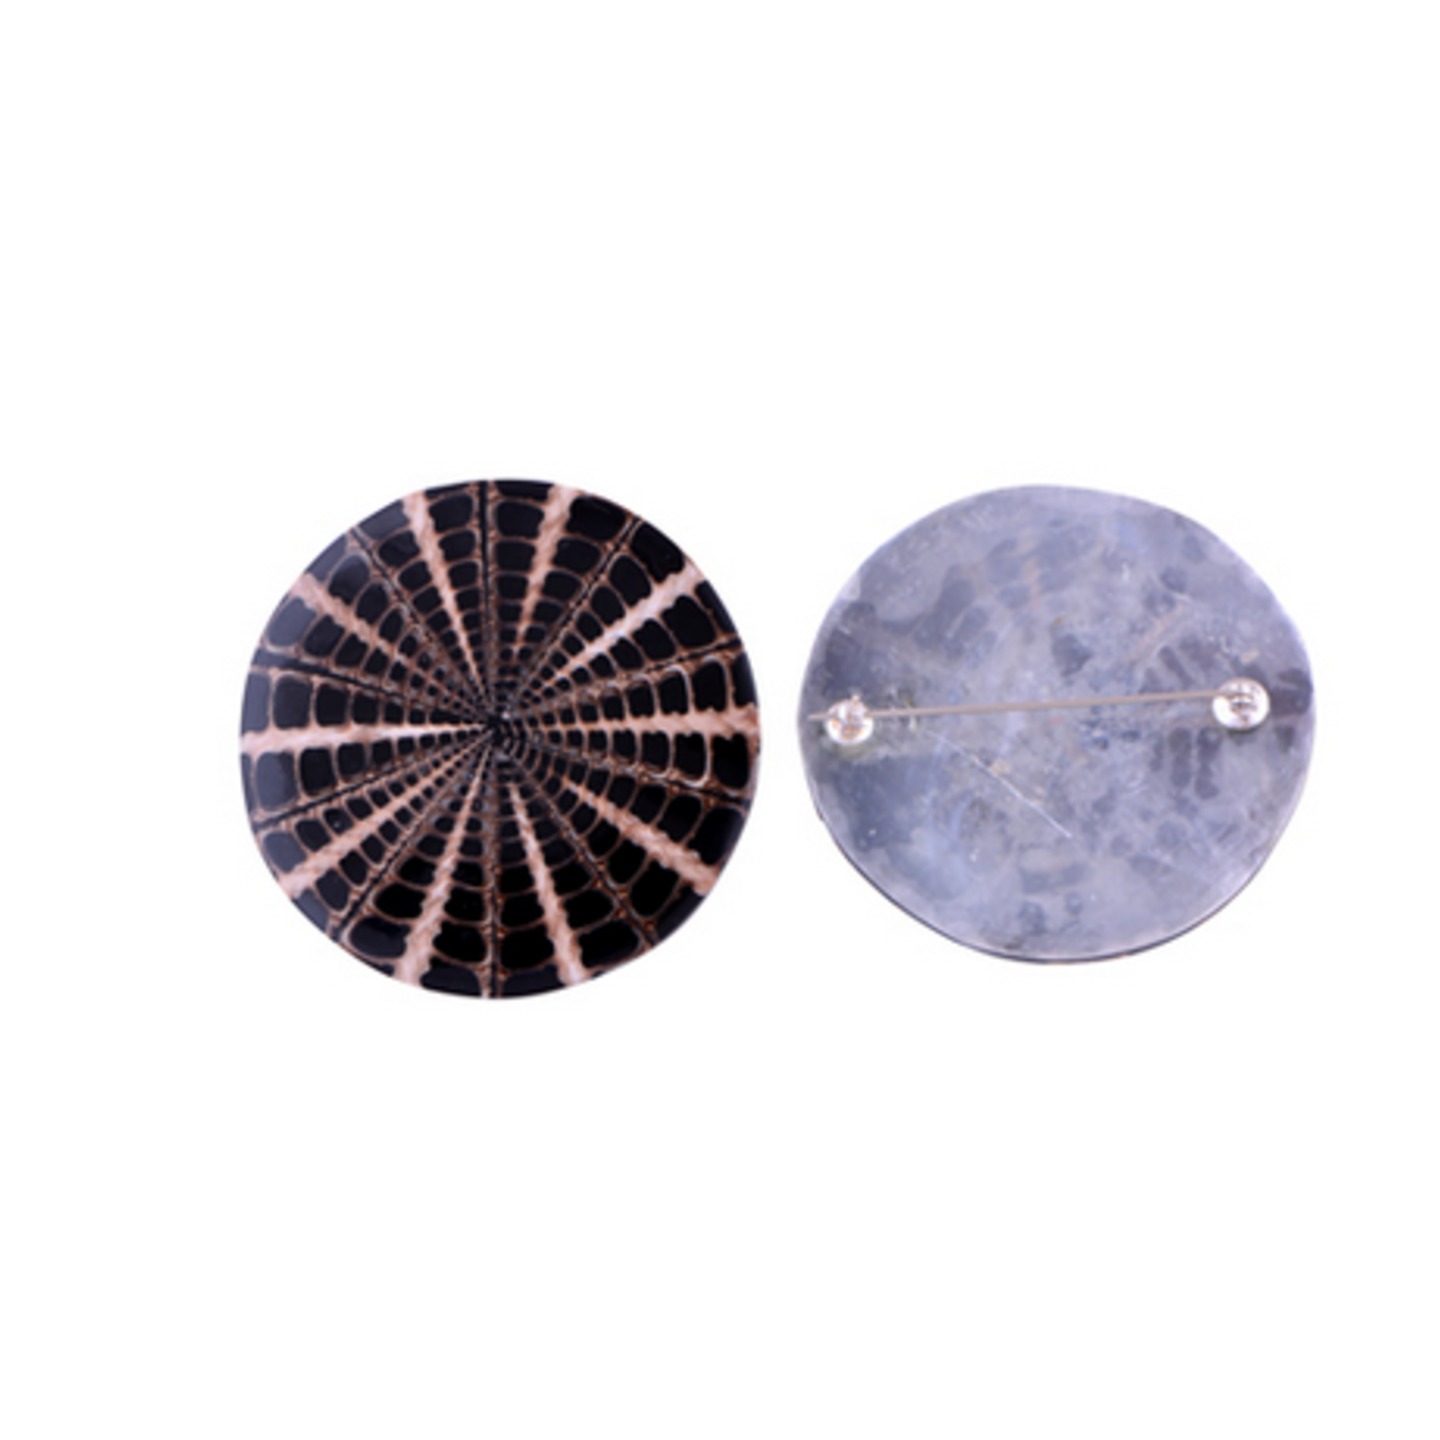 The Vibration Shell Silver Brooch